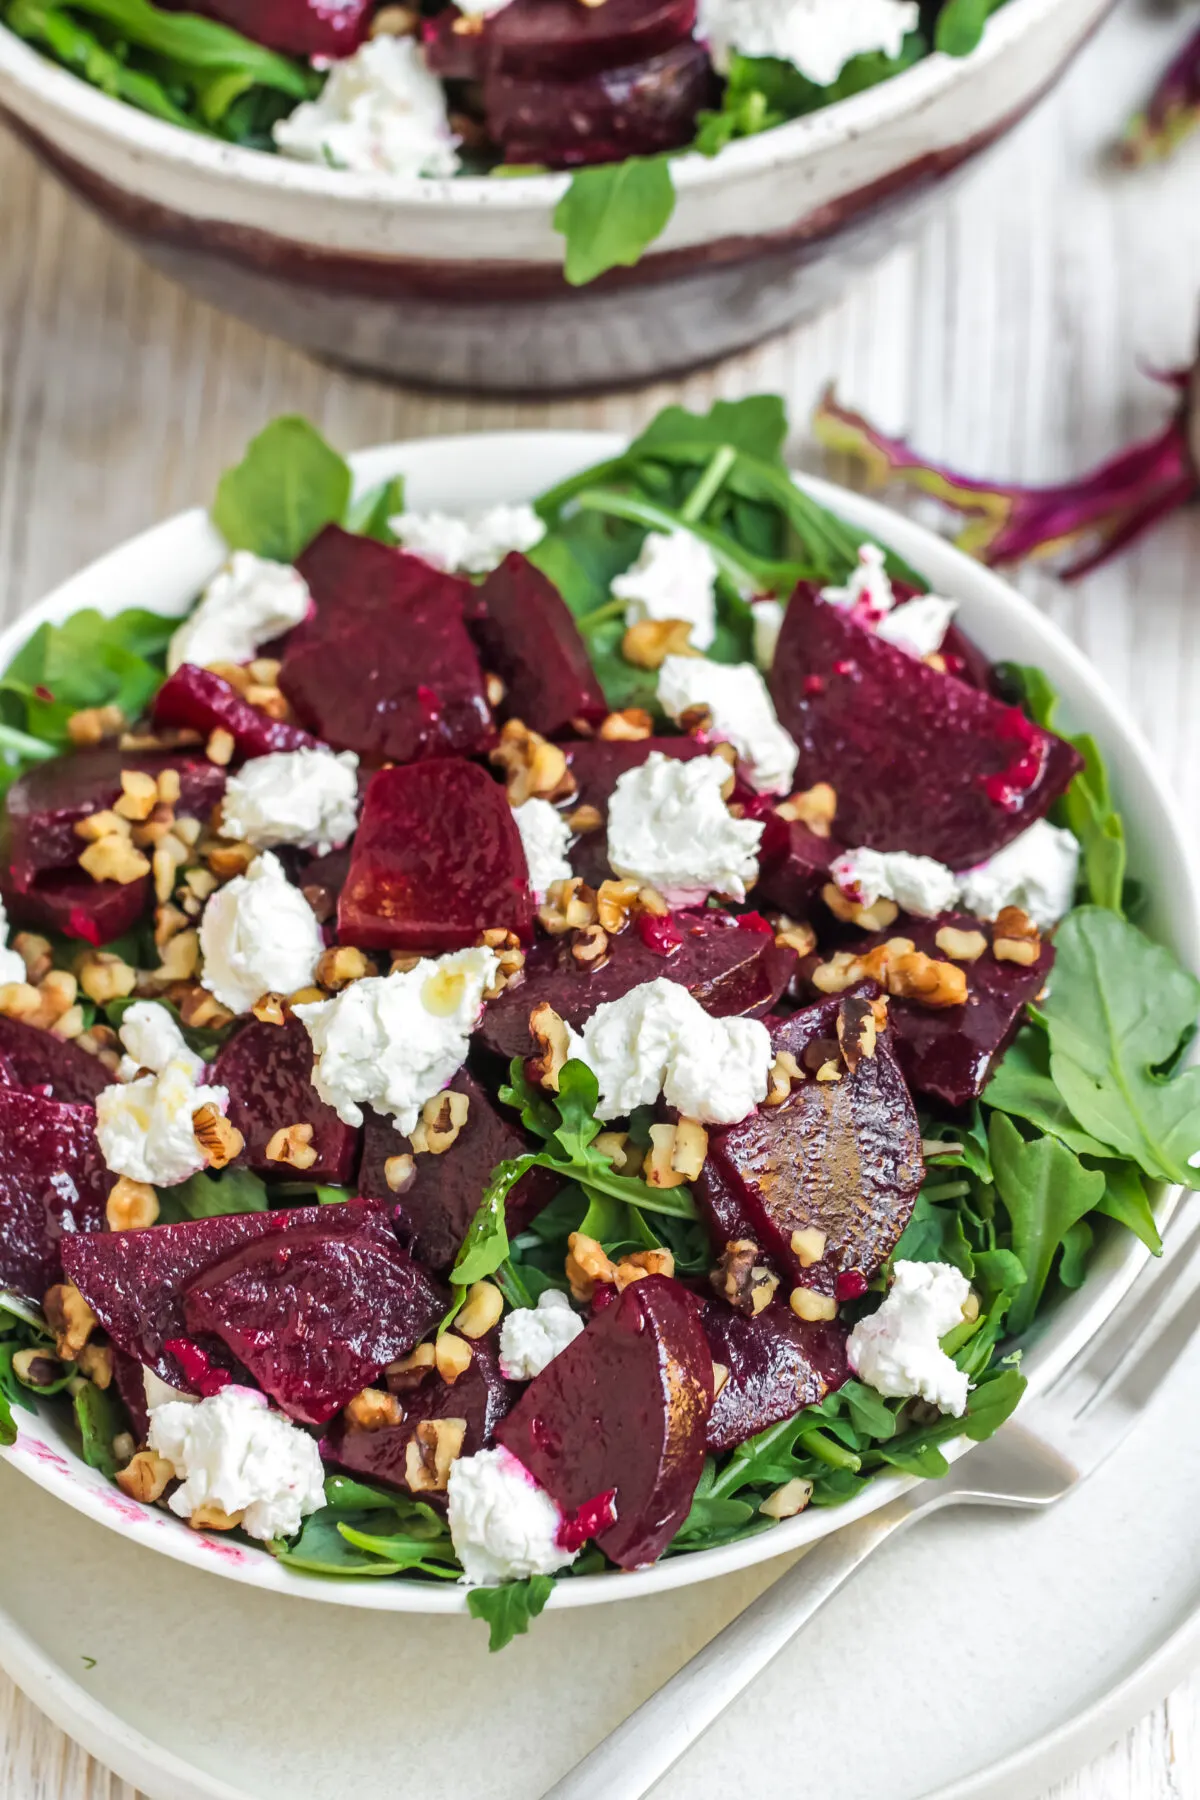 Looking for a delicious and healthy salad recipe? Check out this balsamic roasted beet salad with goat cheese and walnuts!